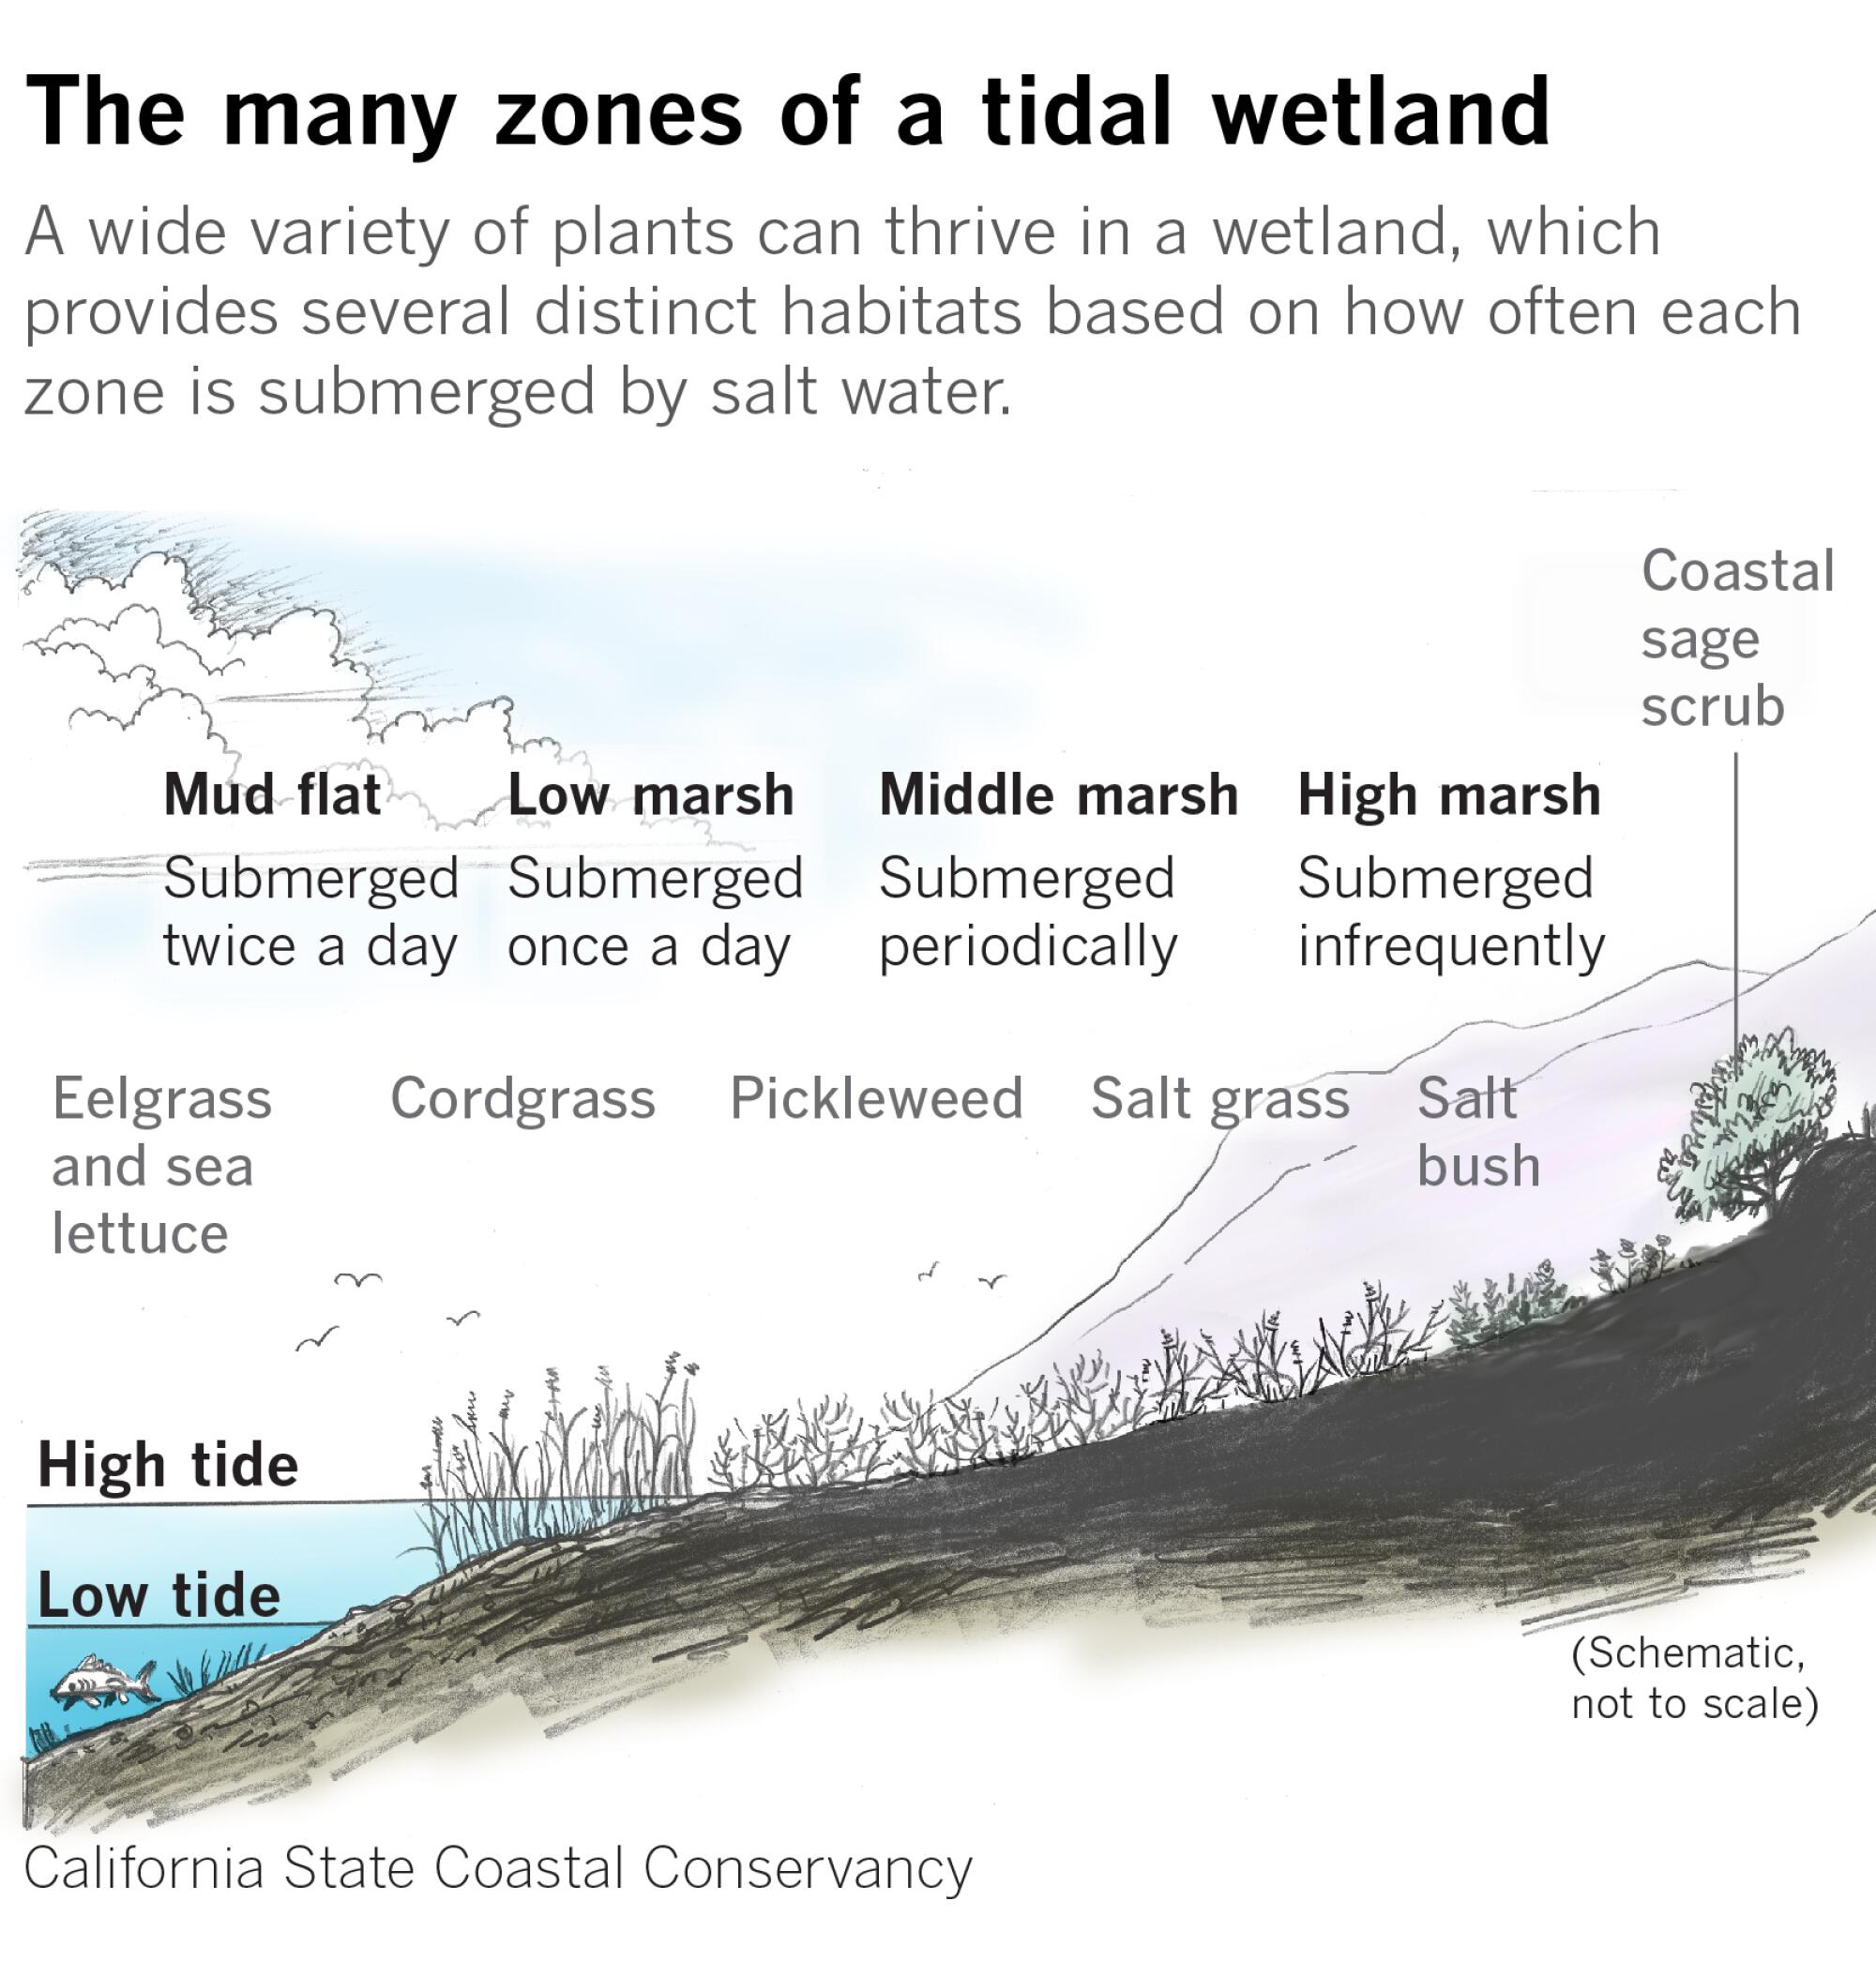 Zones of a tidal wetland: mud flat, low marsh, middle marsh and high marsh.